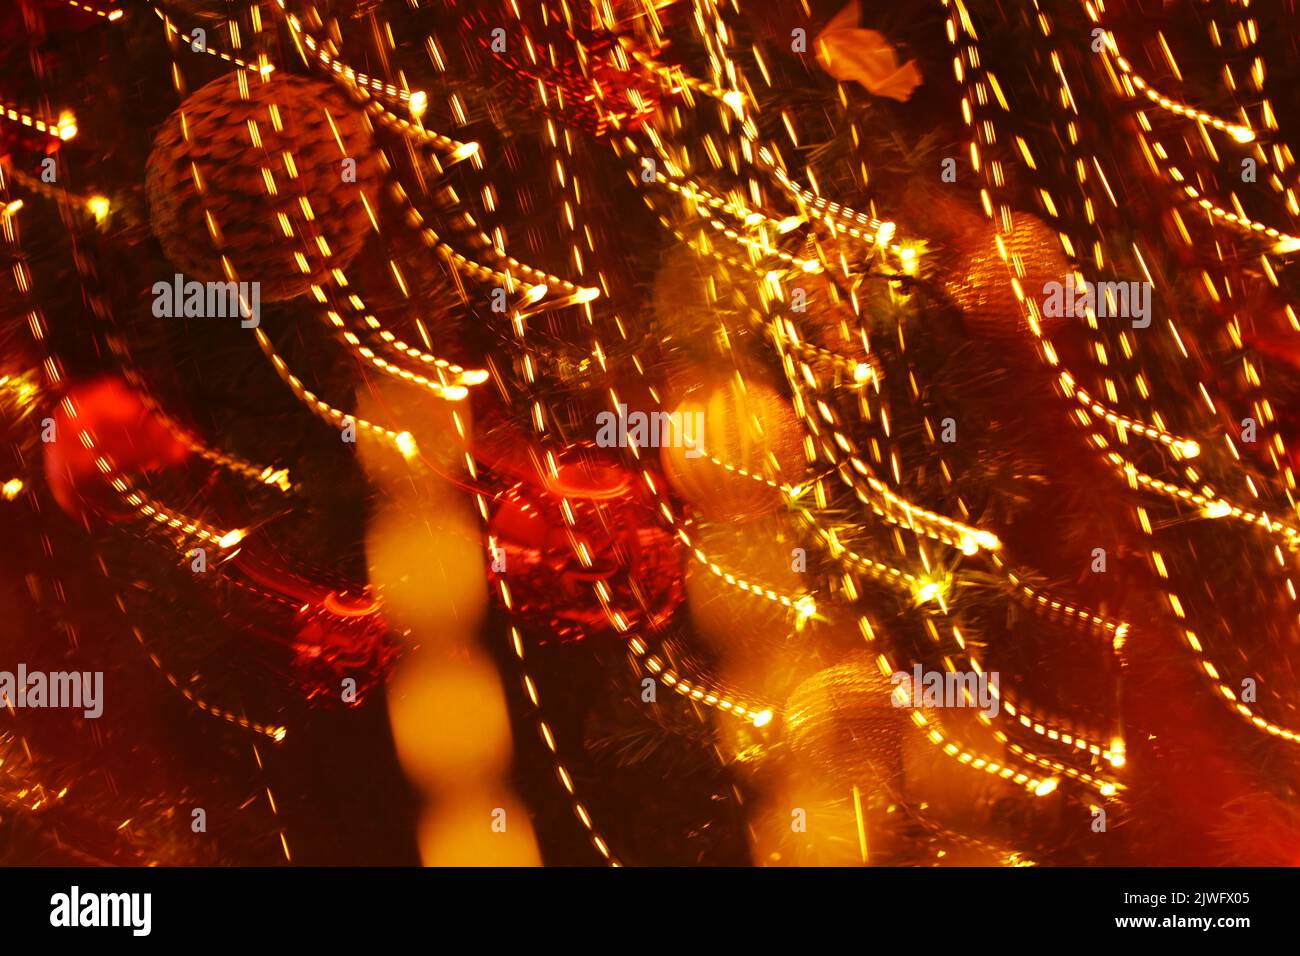 Background material photo of golden Christmas illumination taken with panning and defocus Stock Photo